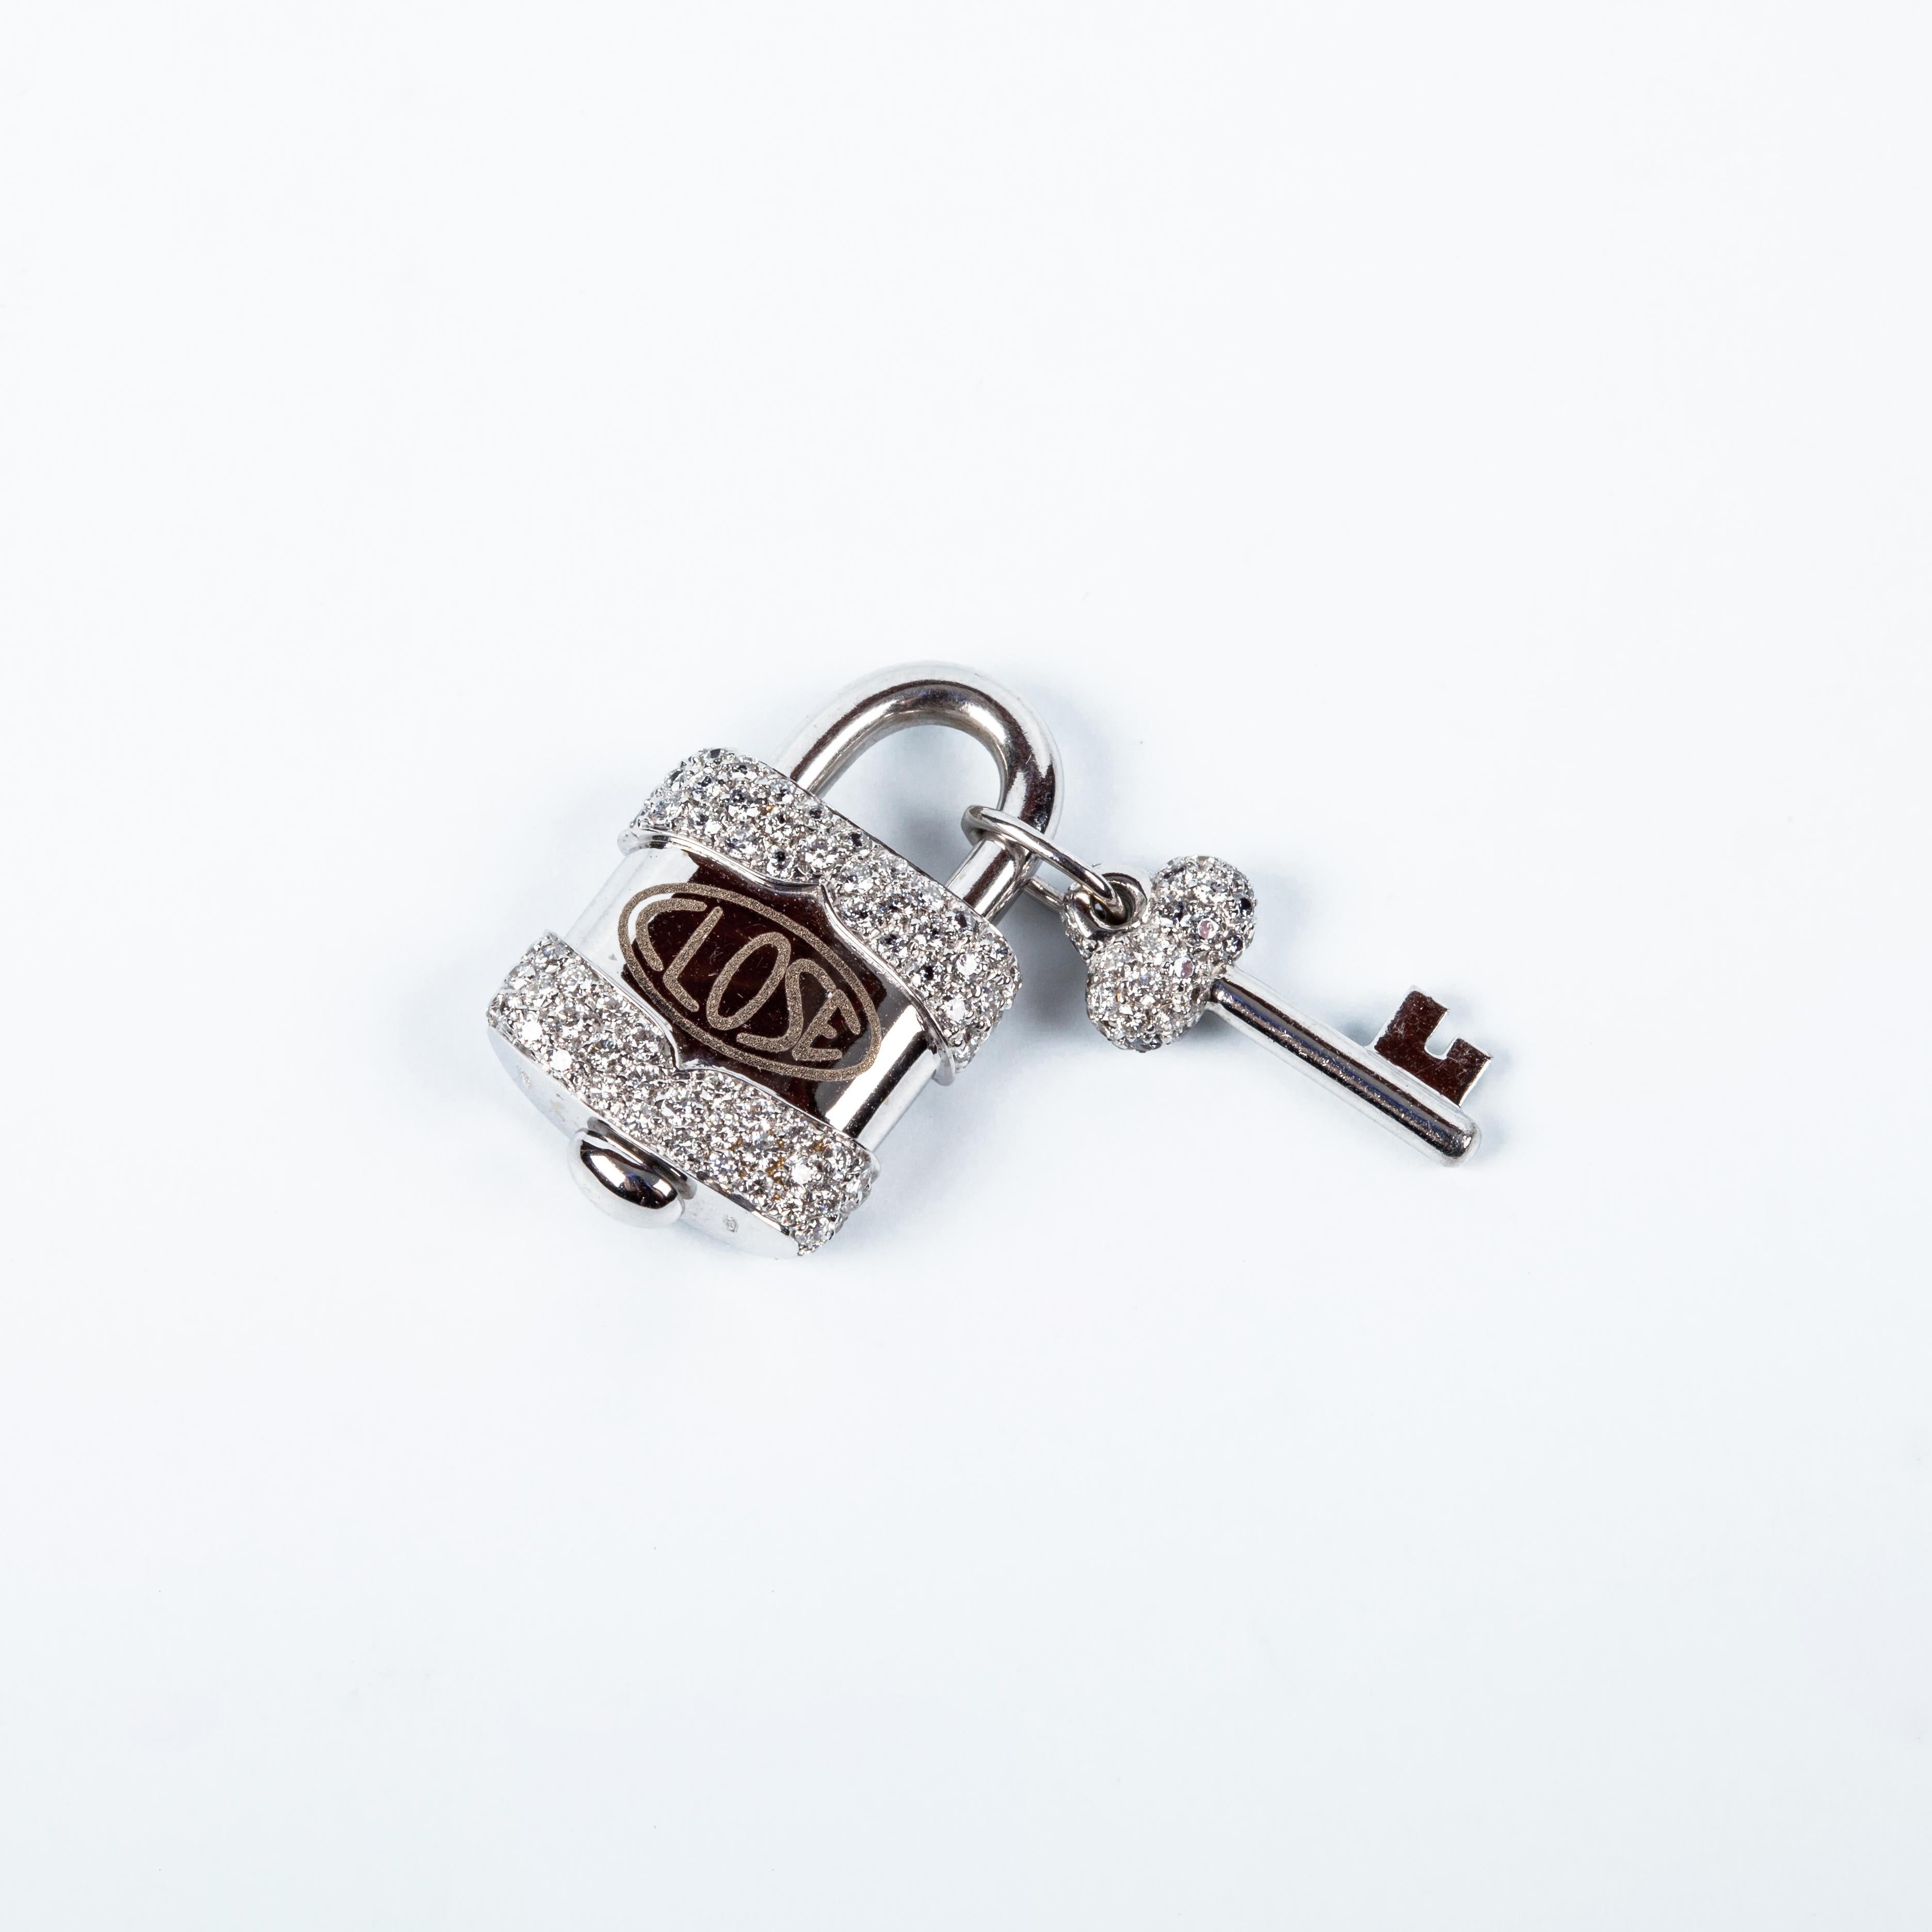 Charm Link Lock Pendant or Closure 18 Karat White Gold and Diamonds Open Close was founded in Valenza Italy in the 70’s, when Bruno Crivelli decided to transcend his vast experience and craftsmanship to form what is known today as: Crivelli